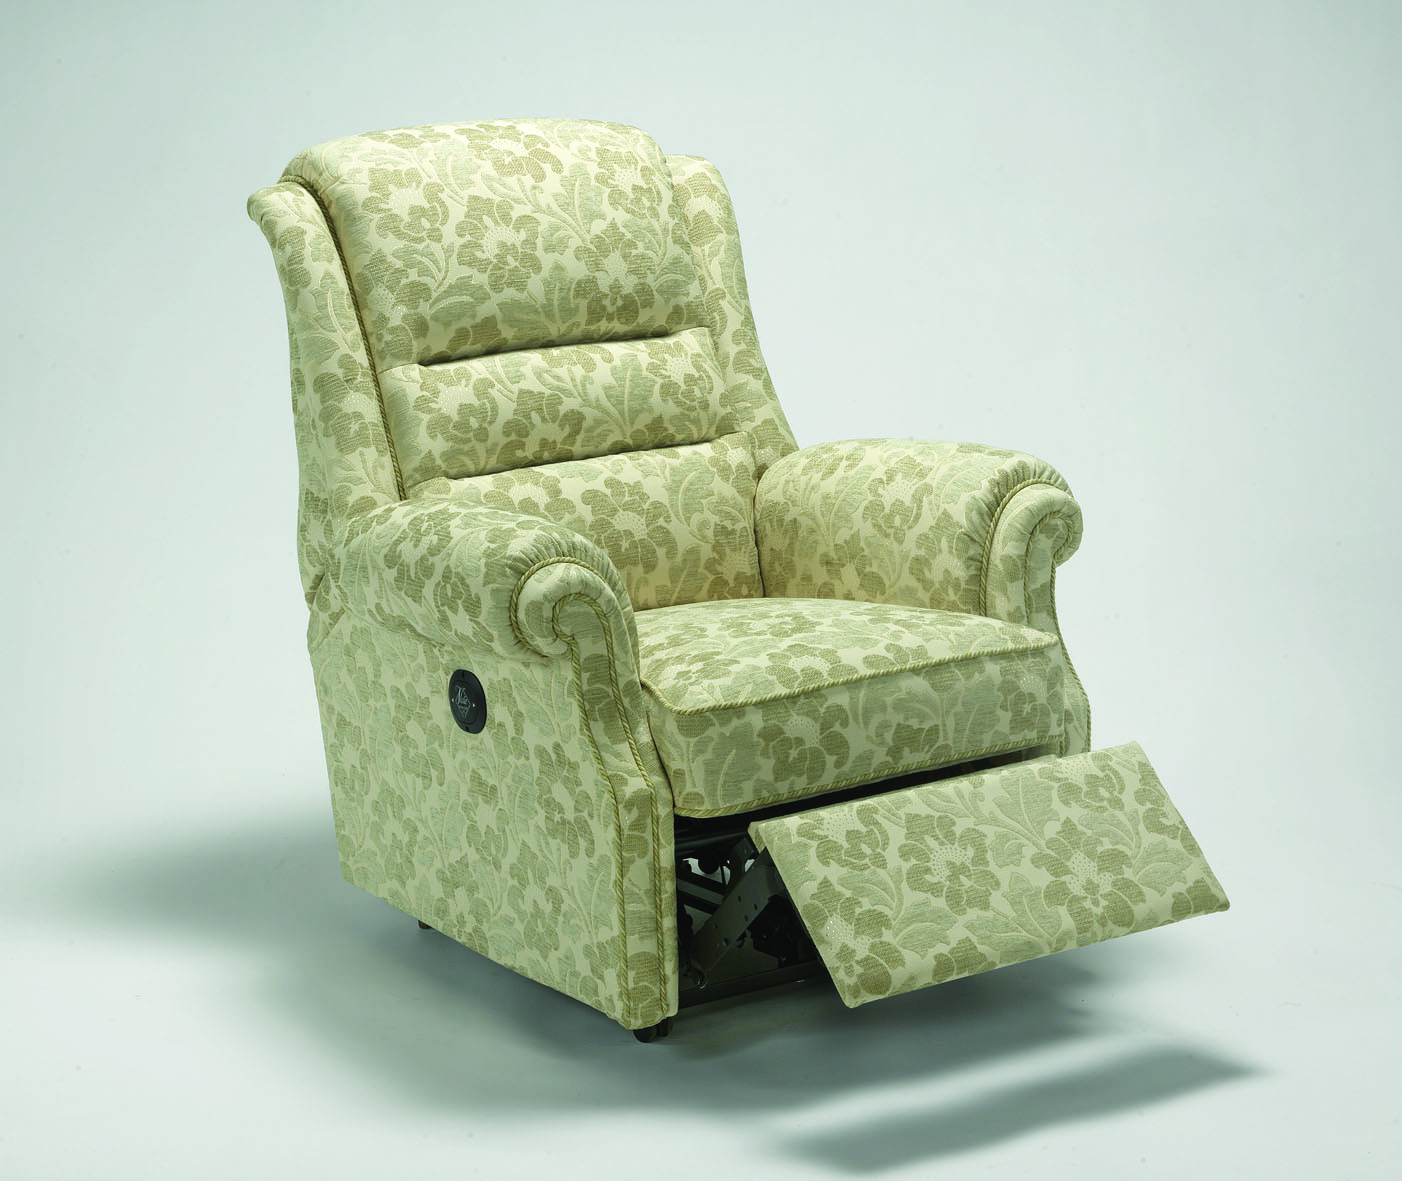 VALE LINCOLN CHAIR RECLINED